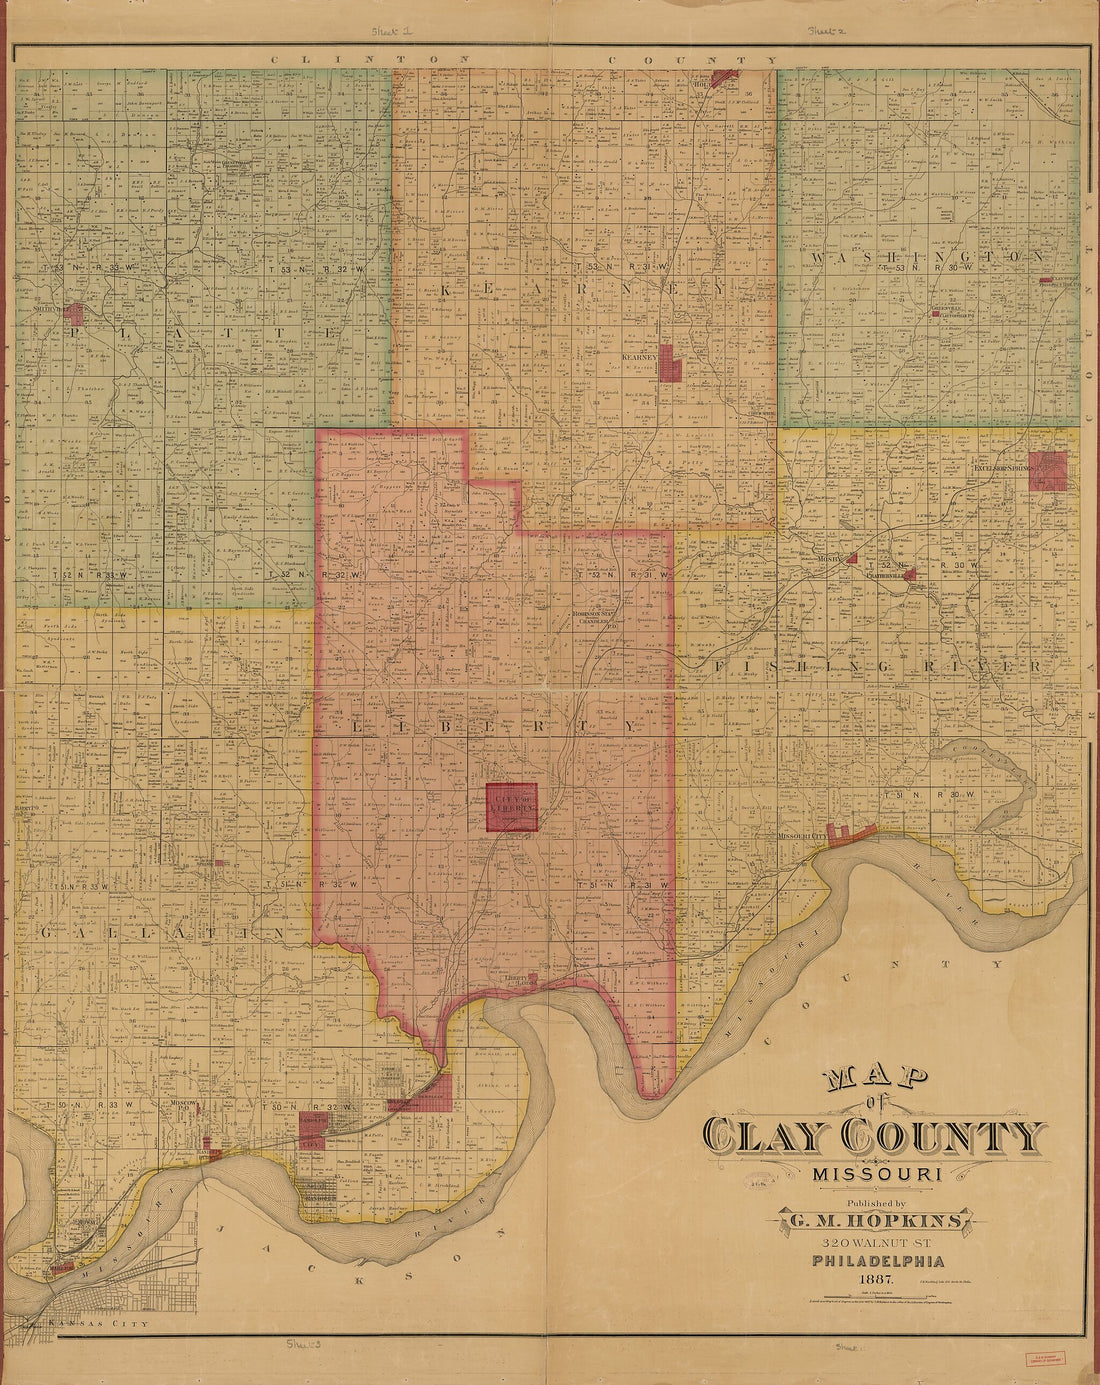 This old map of Map of Clay County, Missouri from 1887 was created by Griffith Morgan Hopkins in 1887